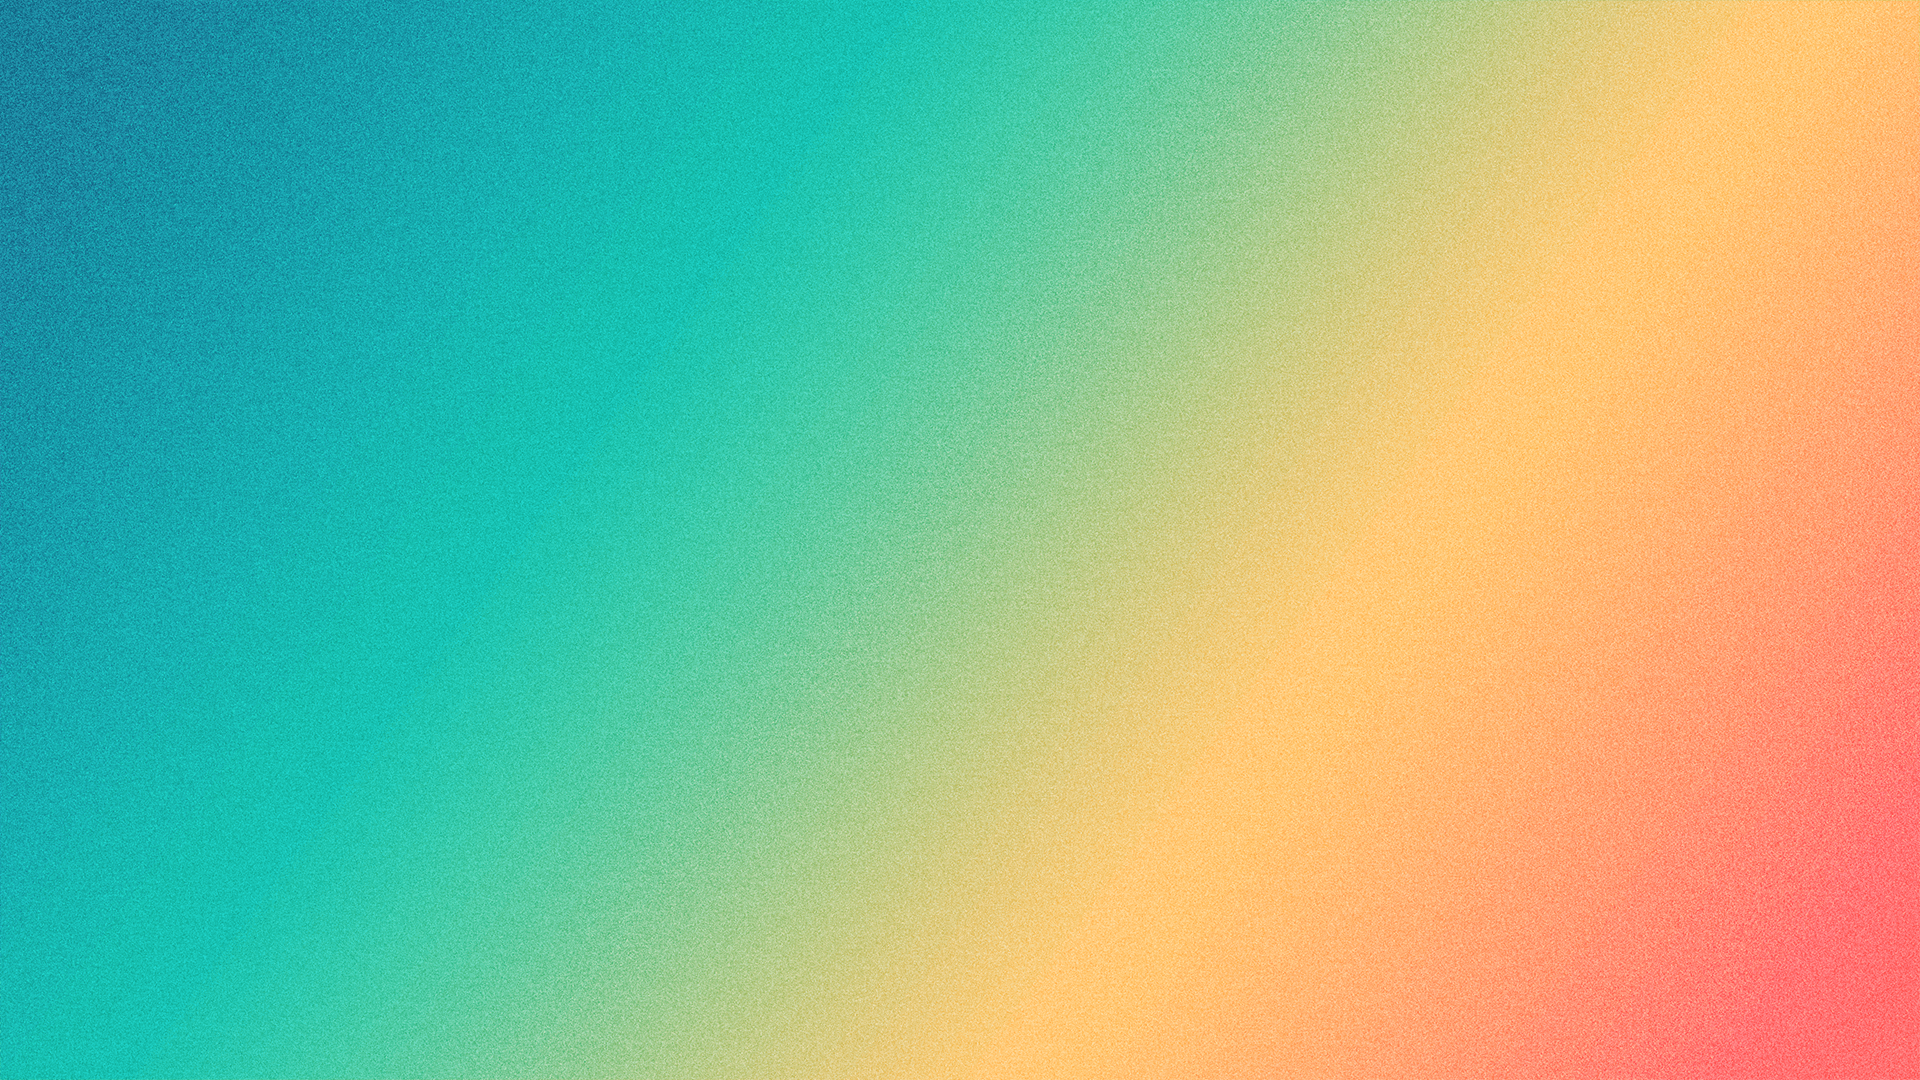 Decorative image: the RUA primary color expression for the RUA logo marks is a gradient using Soft Red, Sun Gold, New Green, and RUA Blue. In this image the color progression begins with the blue on the left side of the screen.